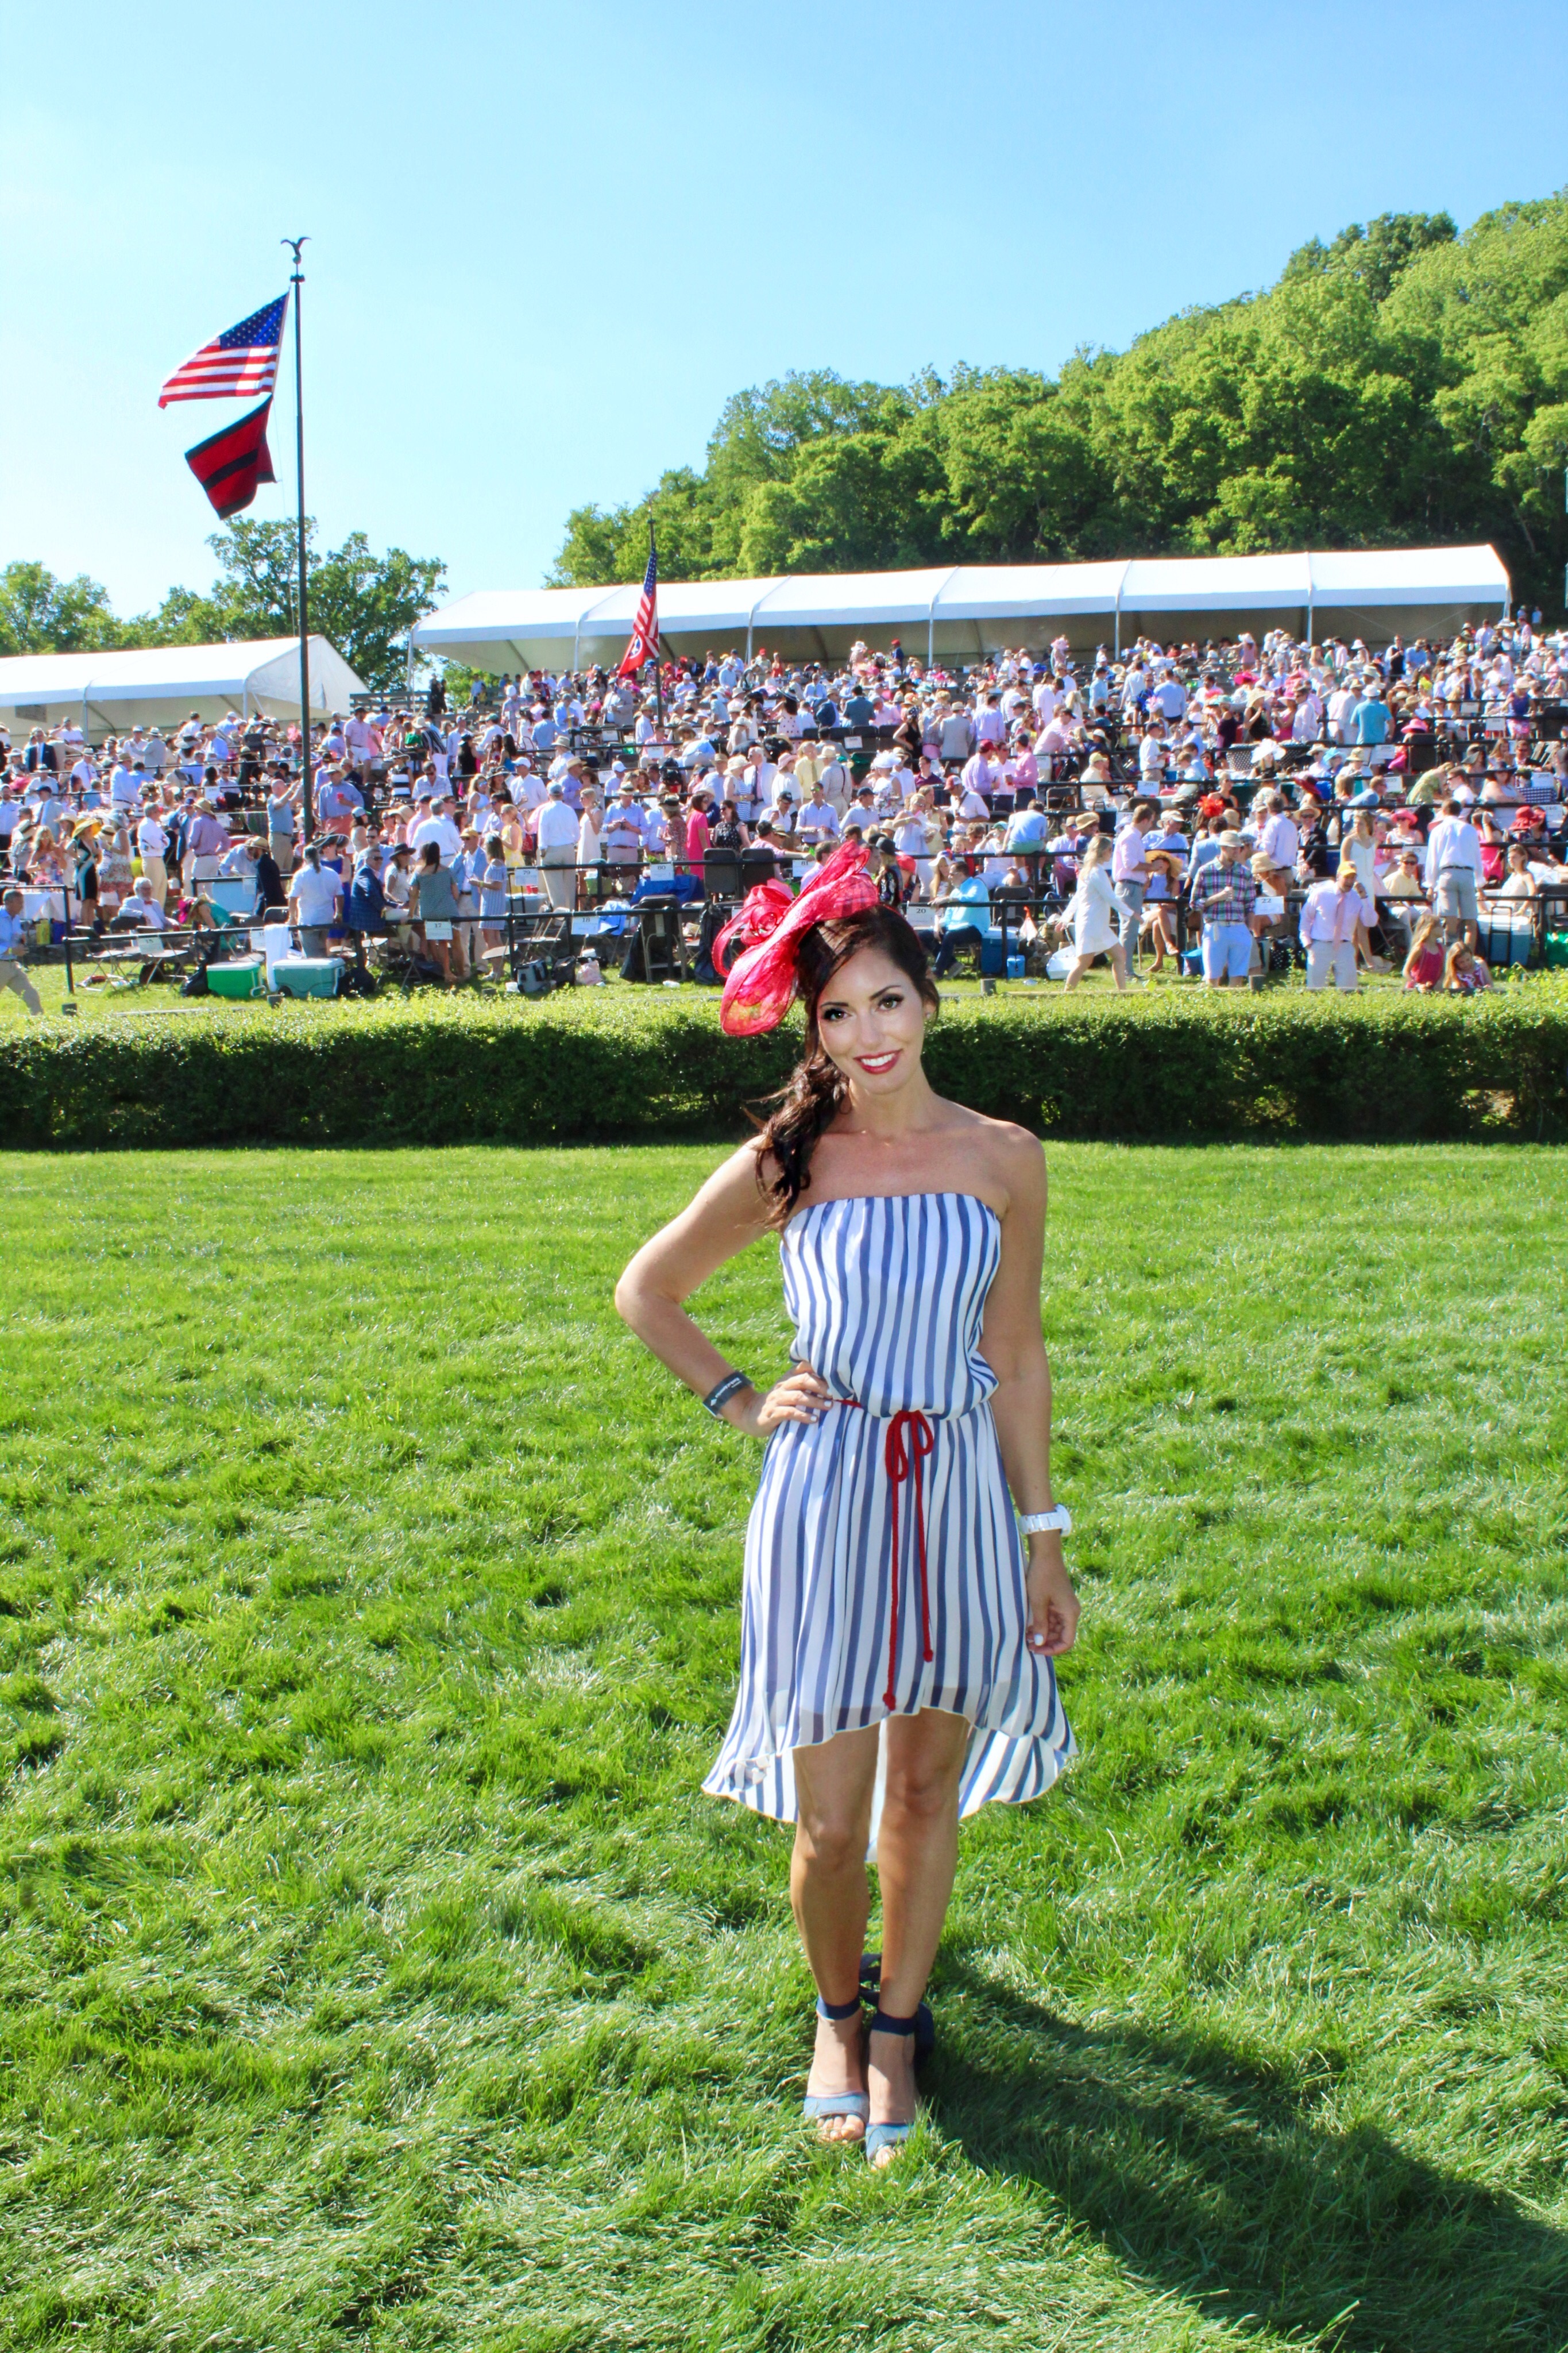 The 76th running of the Iroquois Steeplechase